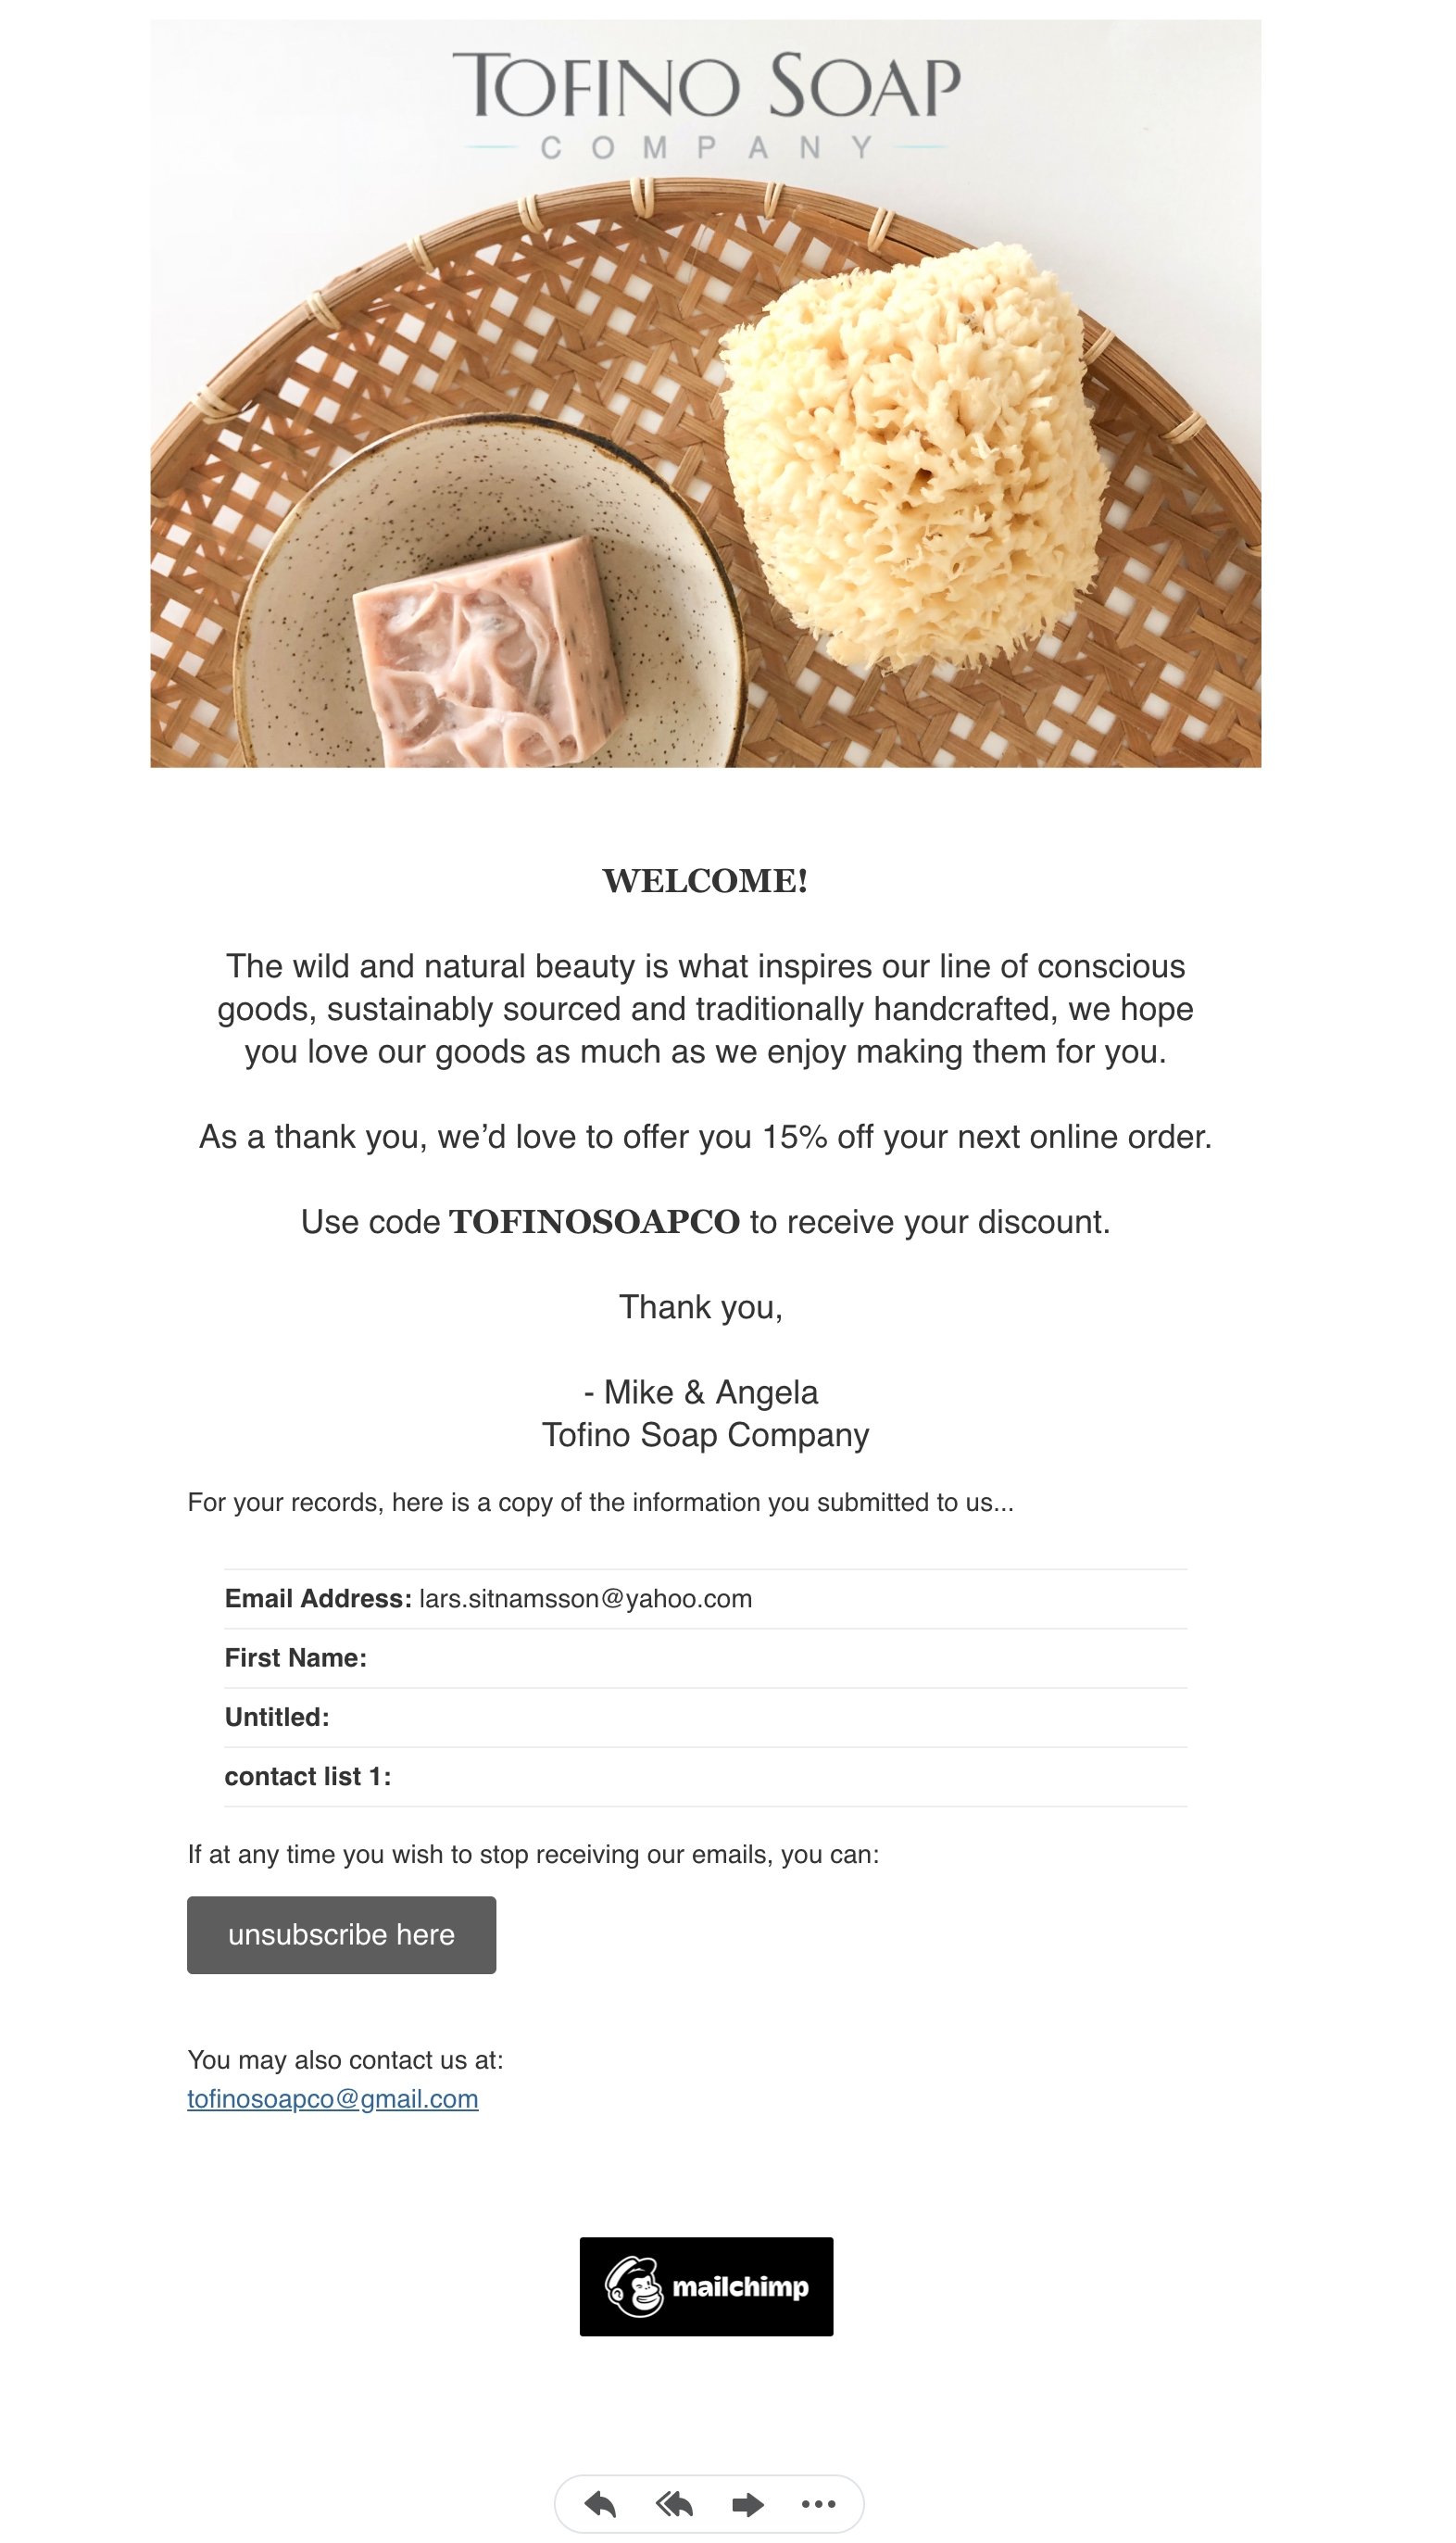 Tofino Soap Company welcome email